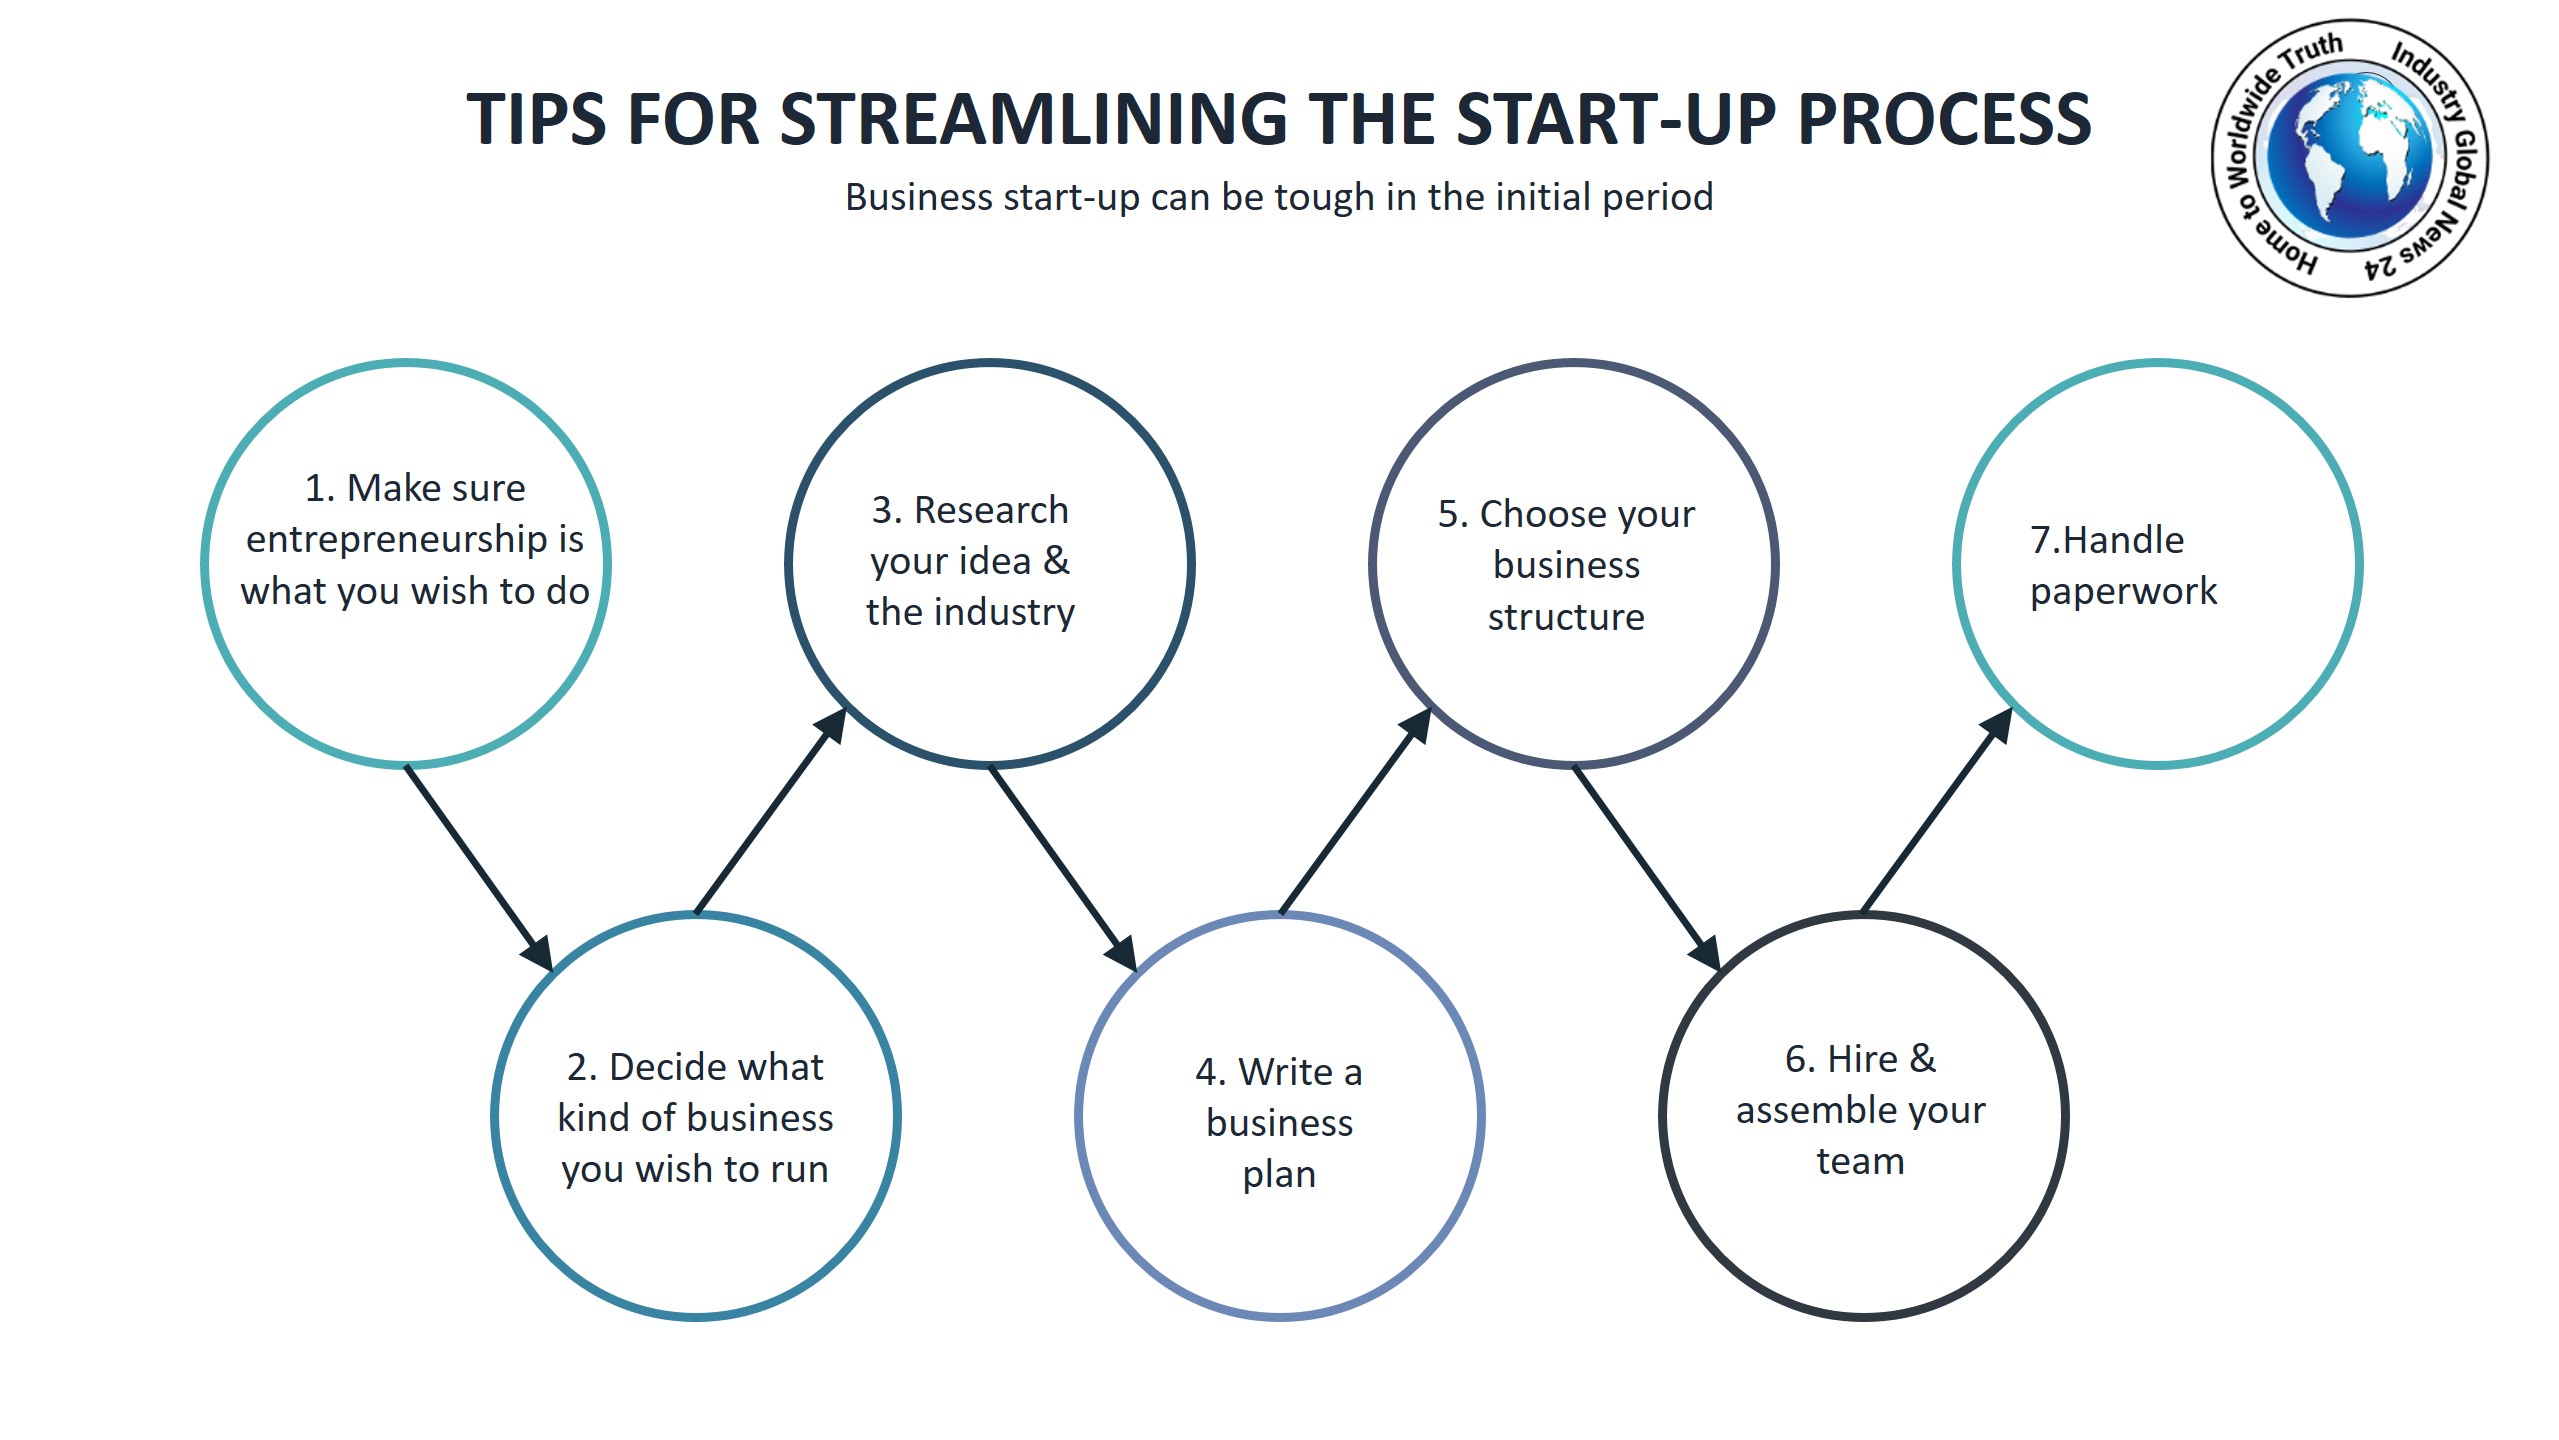 Tips for streamlining the start-up process